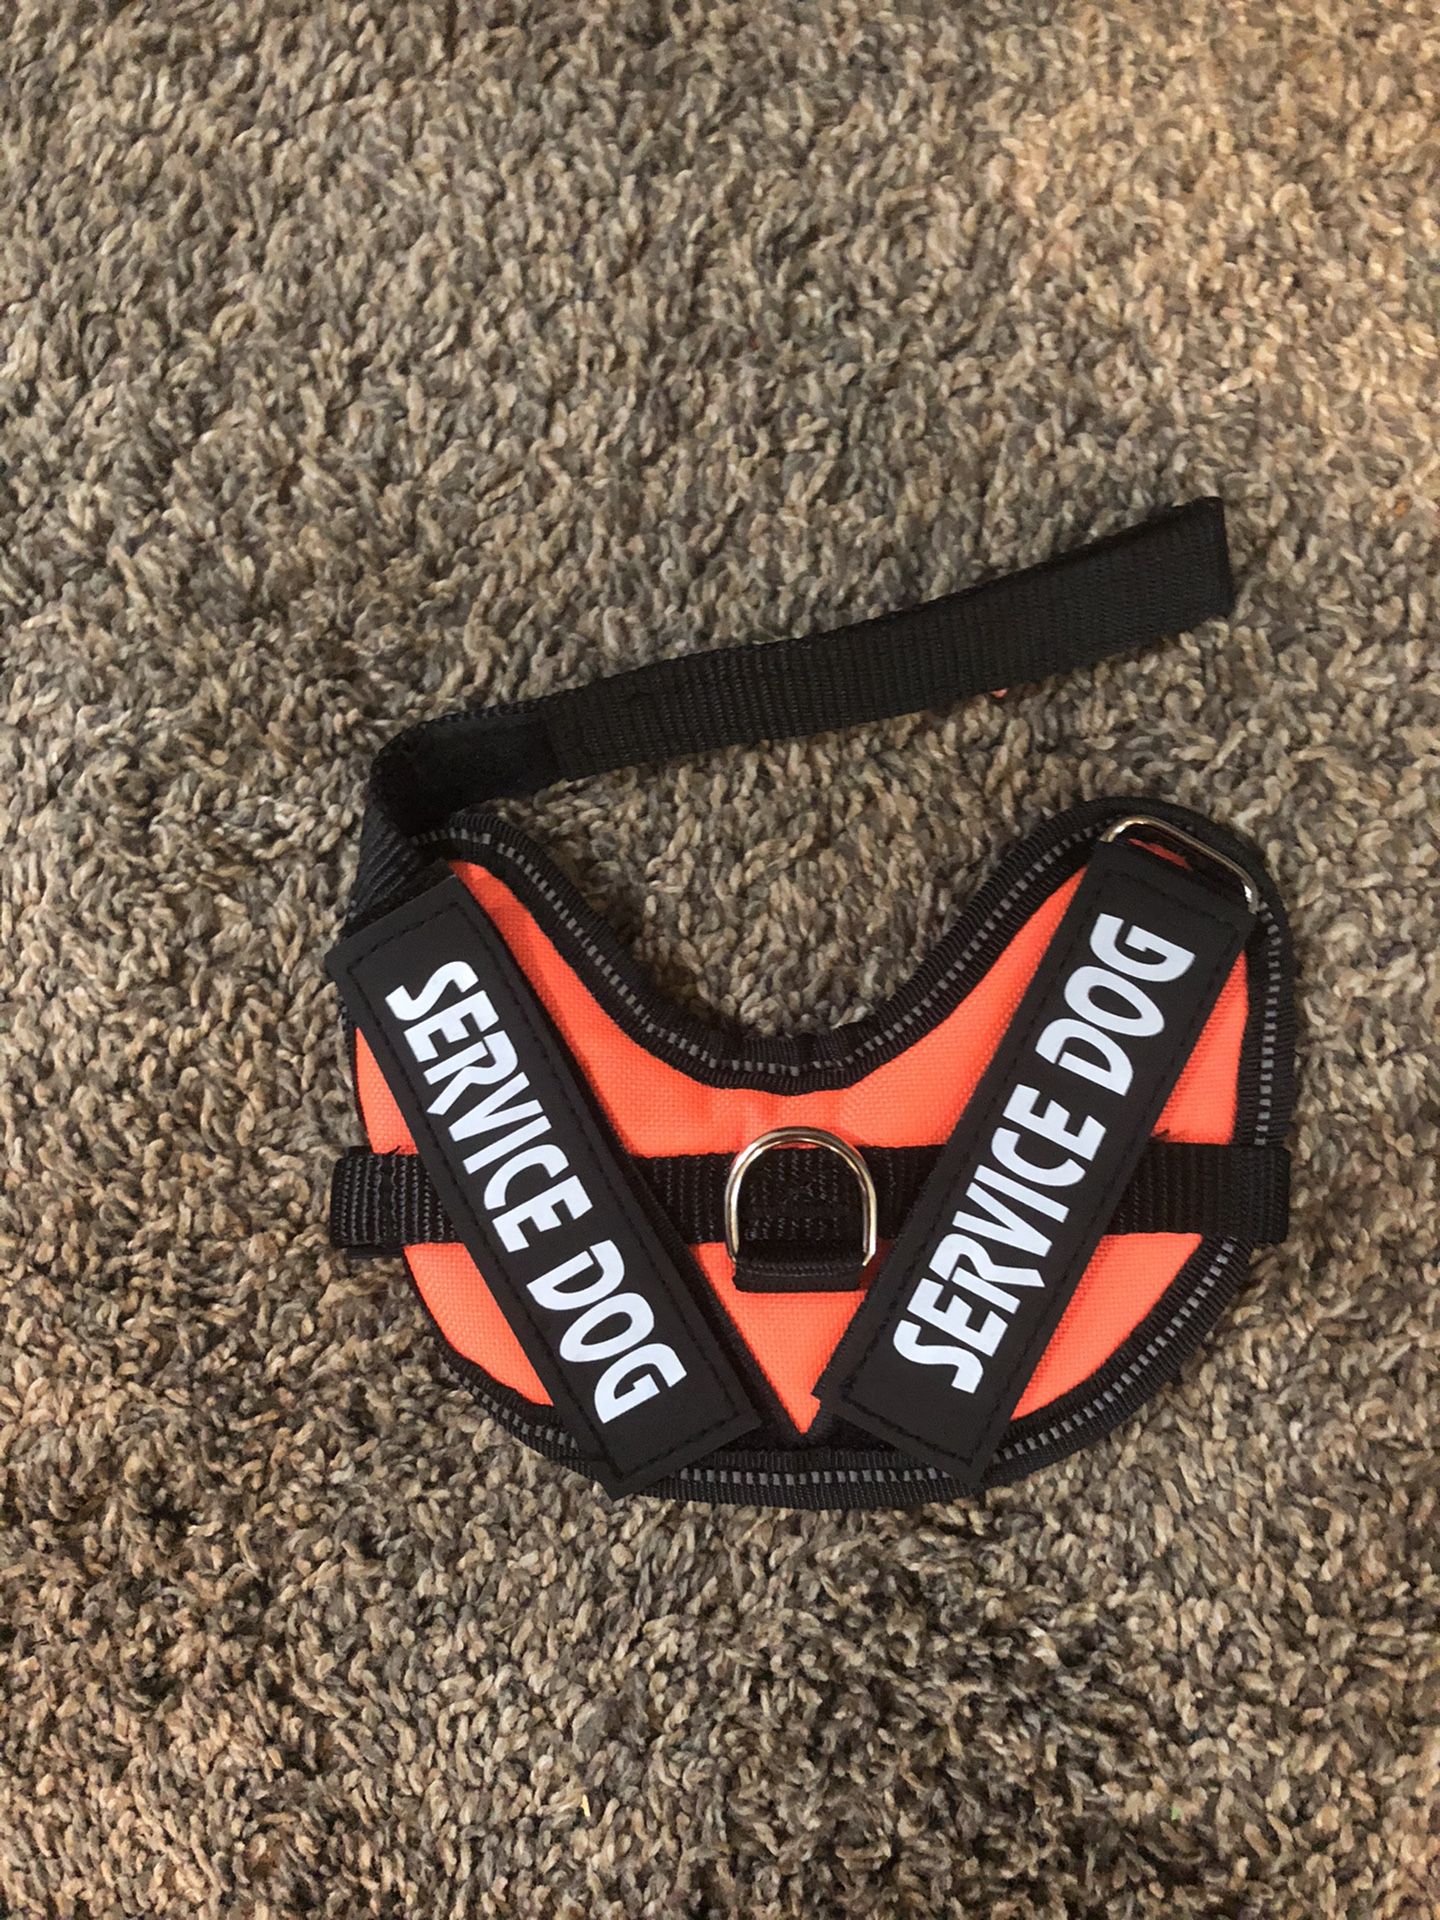 Xsmall service dog harness baby 2 size